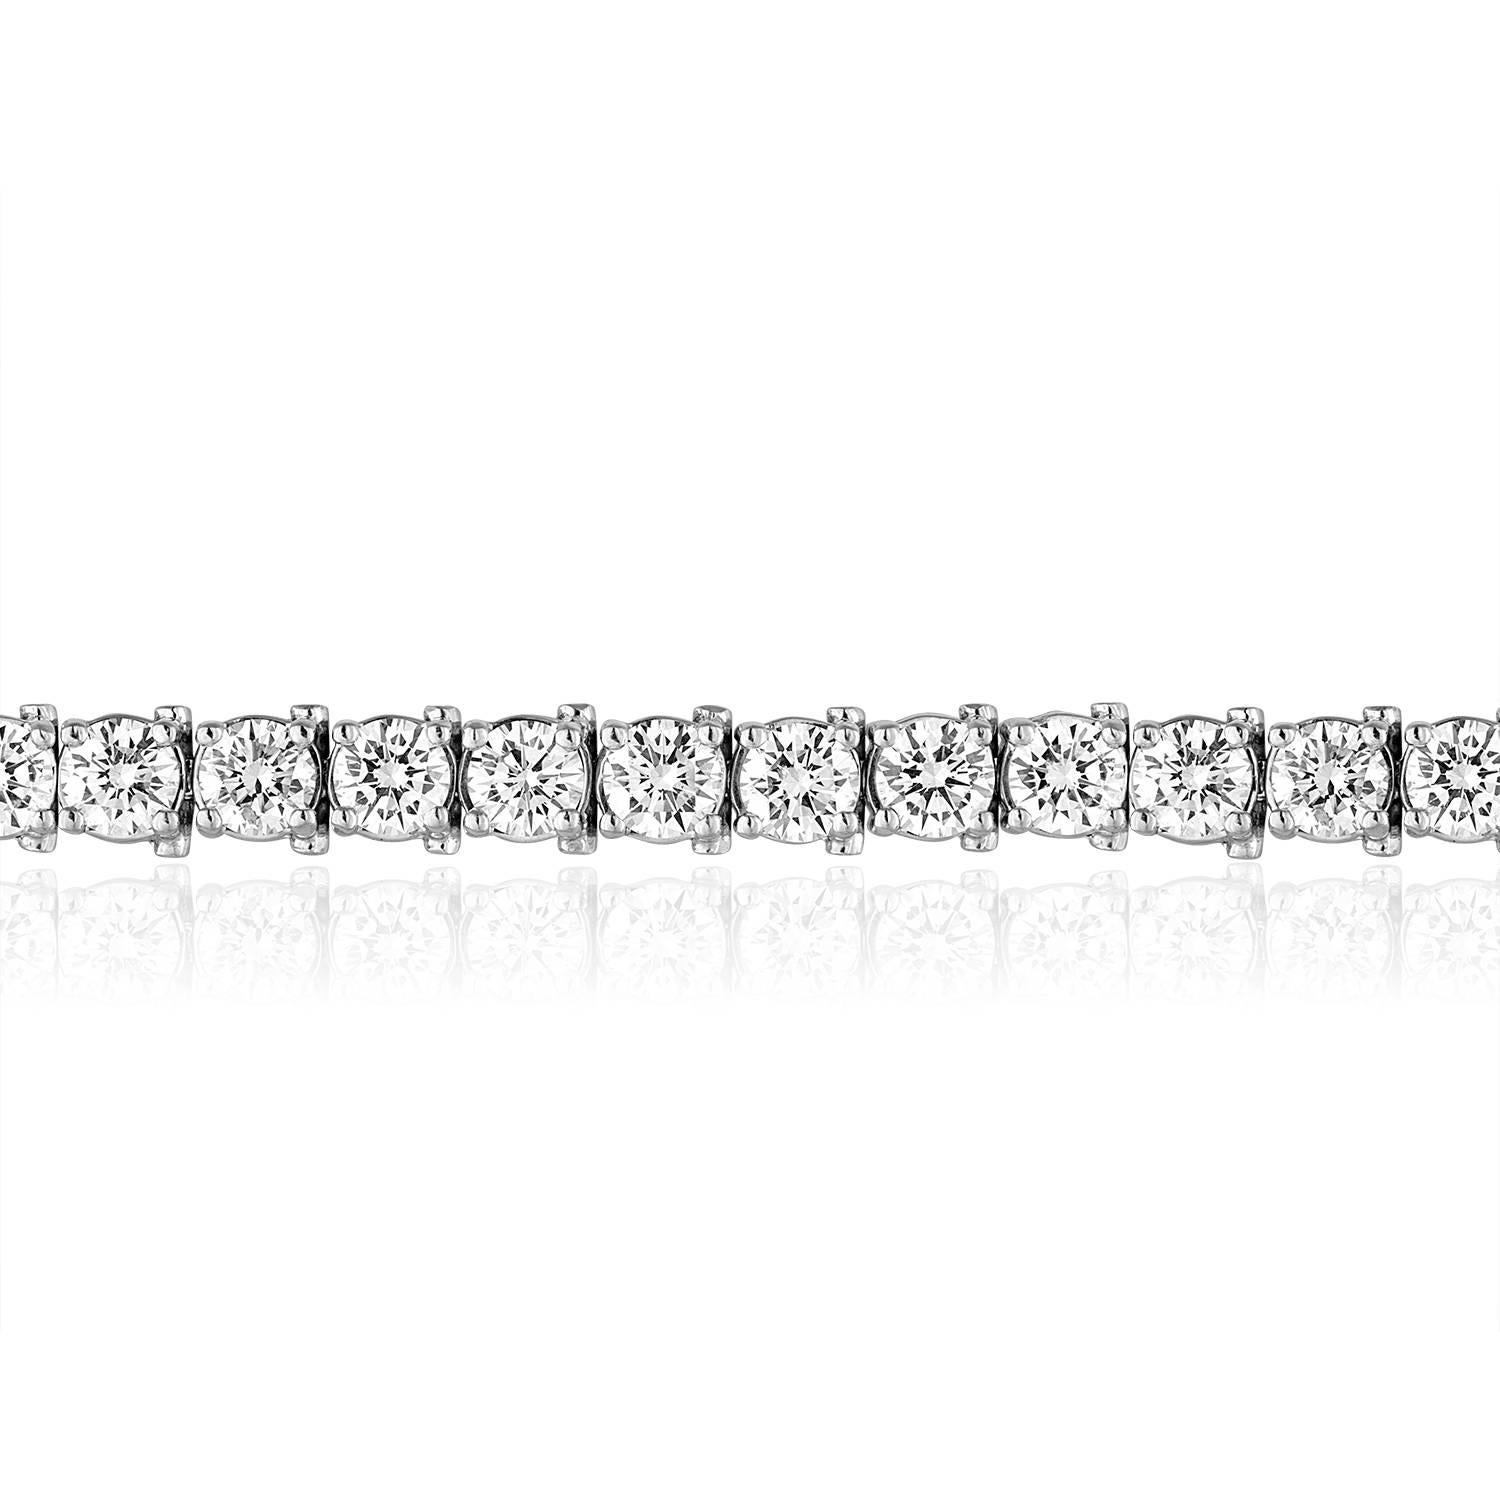 Beautiful And Classic Tennis Bracelet.
The bracelet is 14K White Gold.
There are 13.18 Carats in Diamonds G/H SI1/SI2.
There are 32 stones, each stone is 0.41 Carats.
The bracelet is 7 inches long.
The bracelet weighs 23.3 grams.
The bracelet is IGI